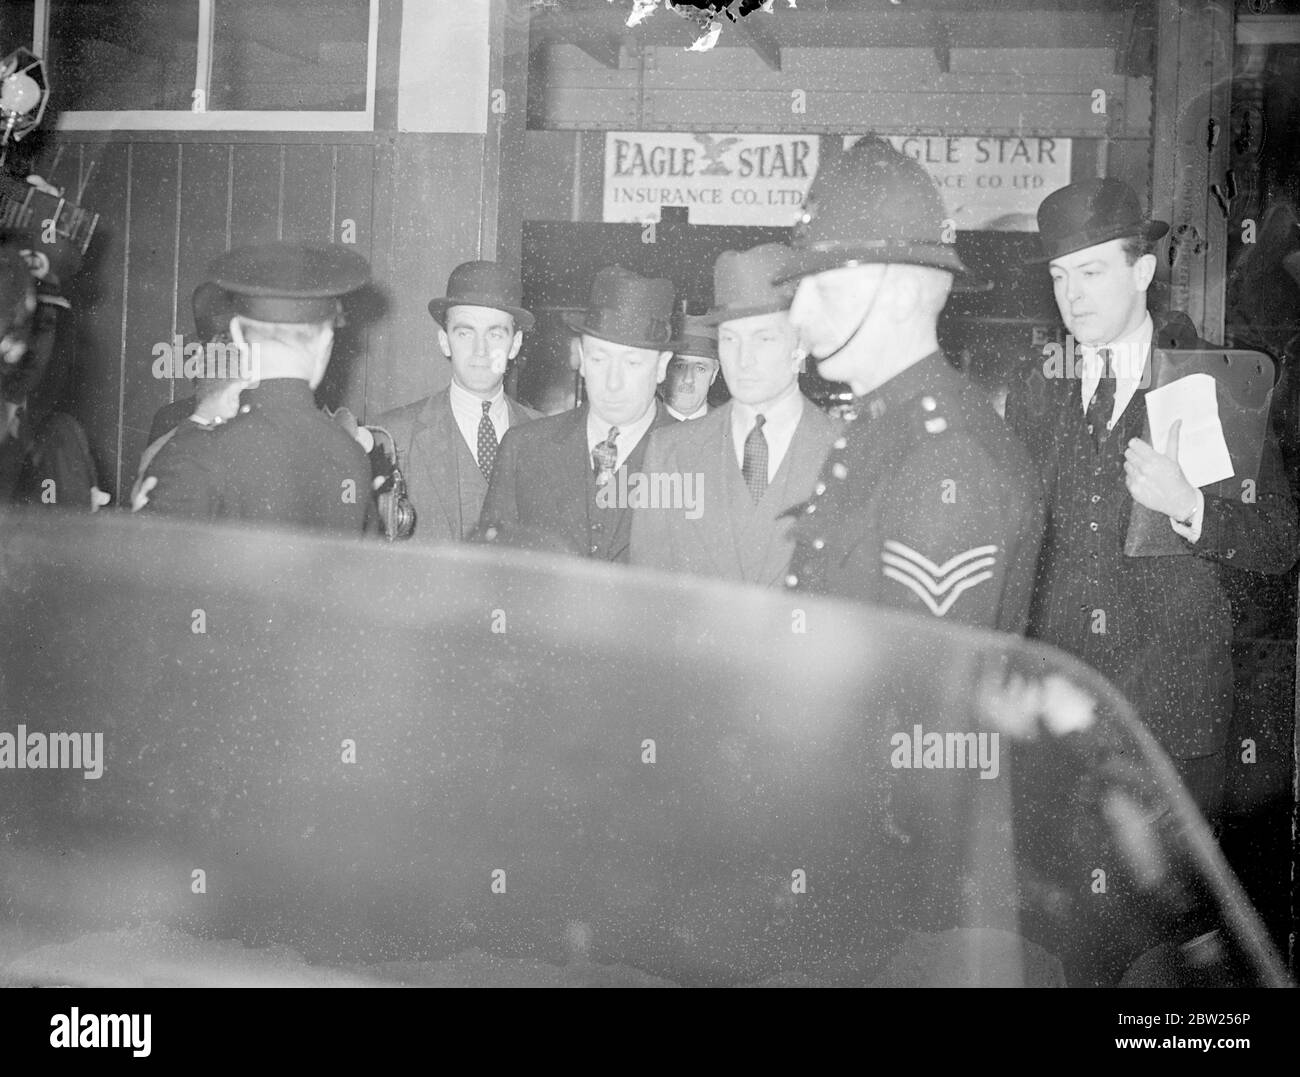 Count Haugwitz Reventlow arrested at Victoria Station. Count Kurt Haugwitz Reventlow, husband of the former Barbara Hutton, arrived at Victoria Station, London, from paris, to appear at Bow Street. He was escorted from Dover by officers of the Special brranch at Scotland yard. last week, following runours of Kidnap threats to their son, lance, Countess Haugwitz Reventlow went to Bow Street. A warrant was issued for the arrest of the Count. Photo shows, Count Kurt haugwitz Reventlow under arrest at Victoria Station. 1 July 1938 Stock Photo